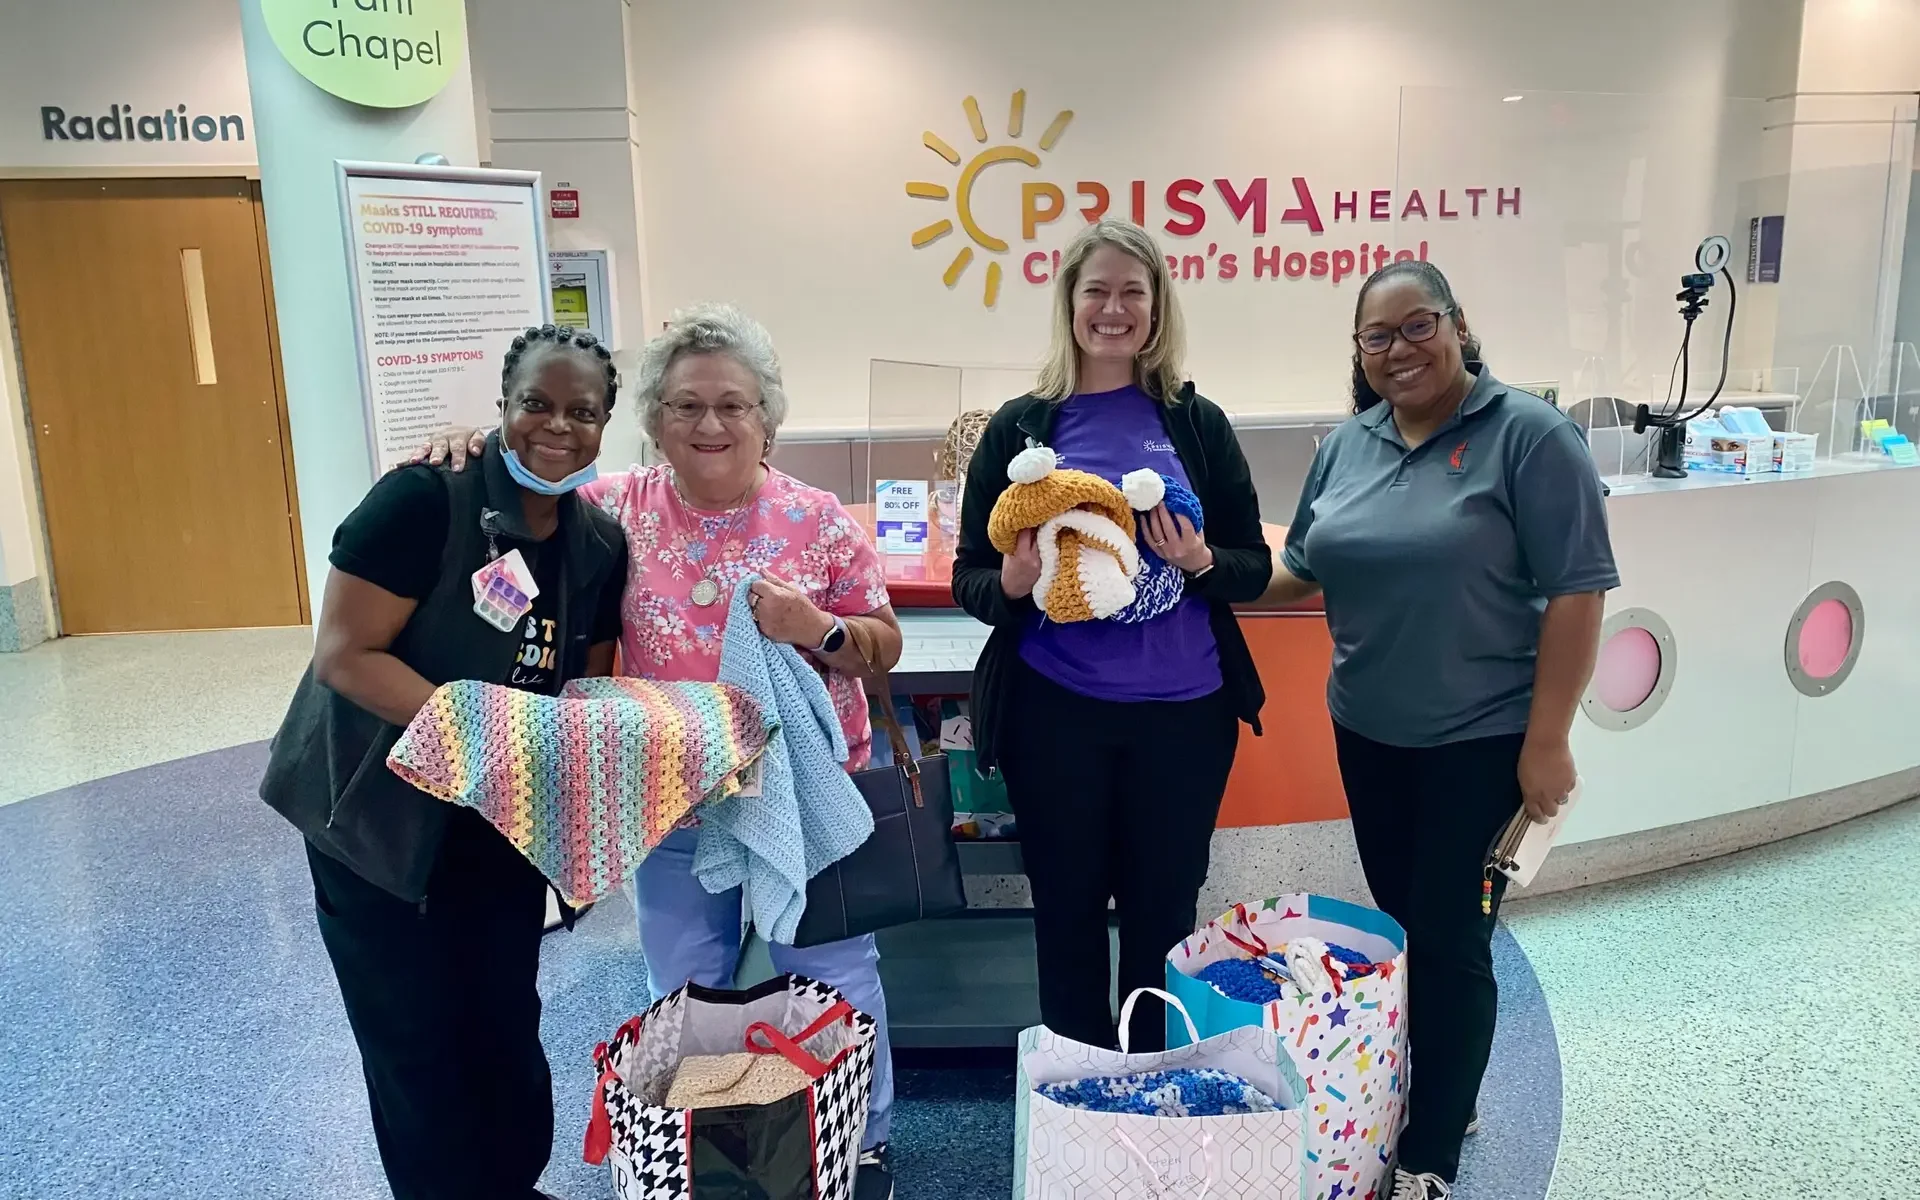 A group of volunteers pose for a photo at Prisma Health after donating prayer shawls.